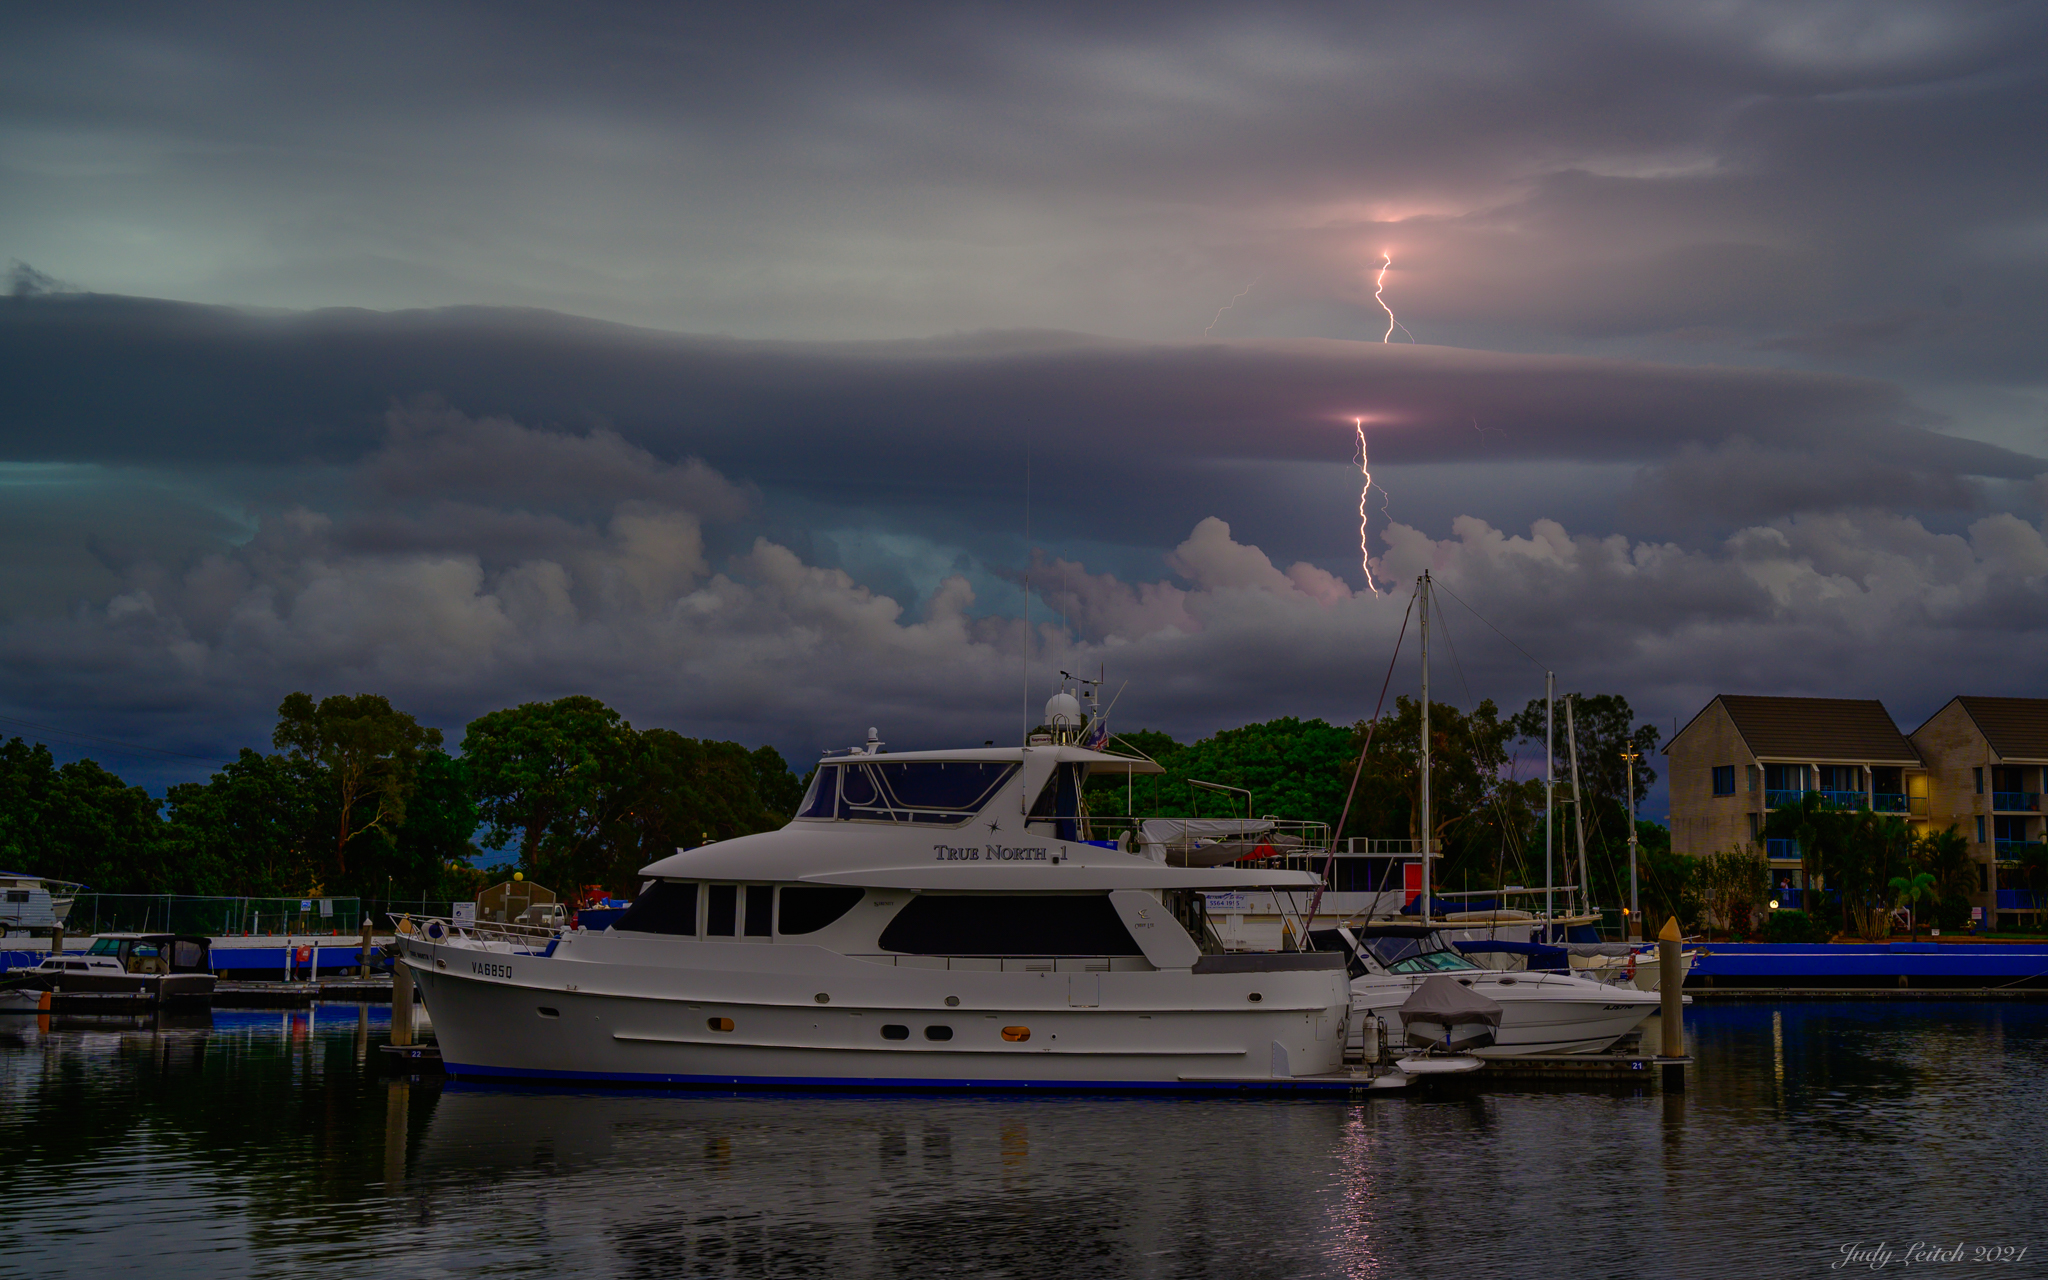 2nd Place Late afternoon summer storm over the northern Gold Coast by Judy Leitch @leitchbird